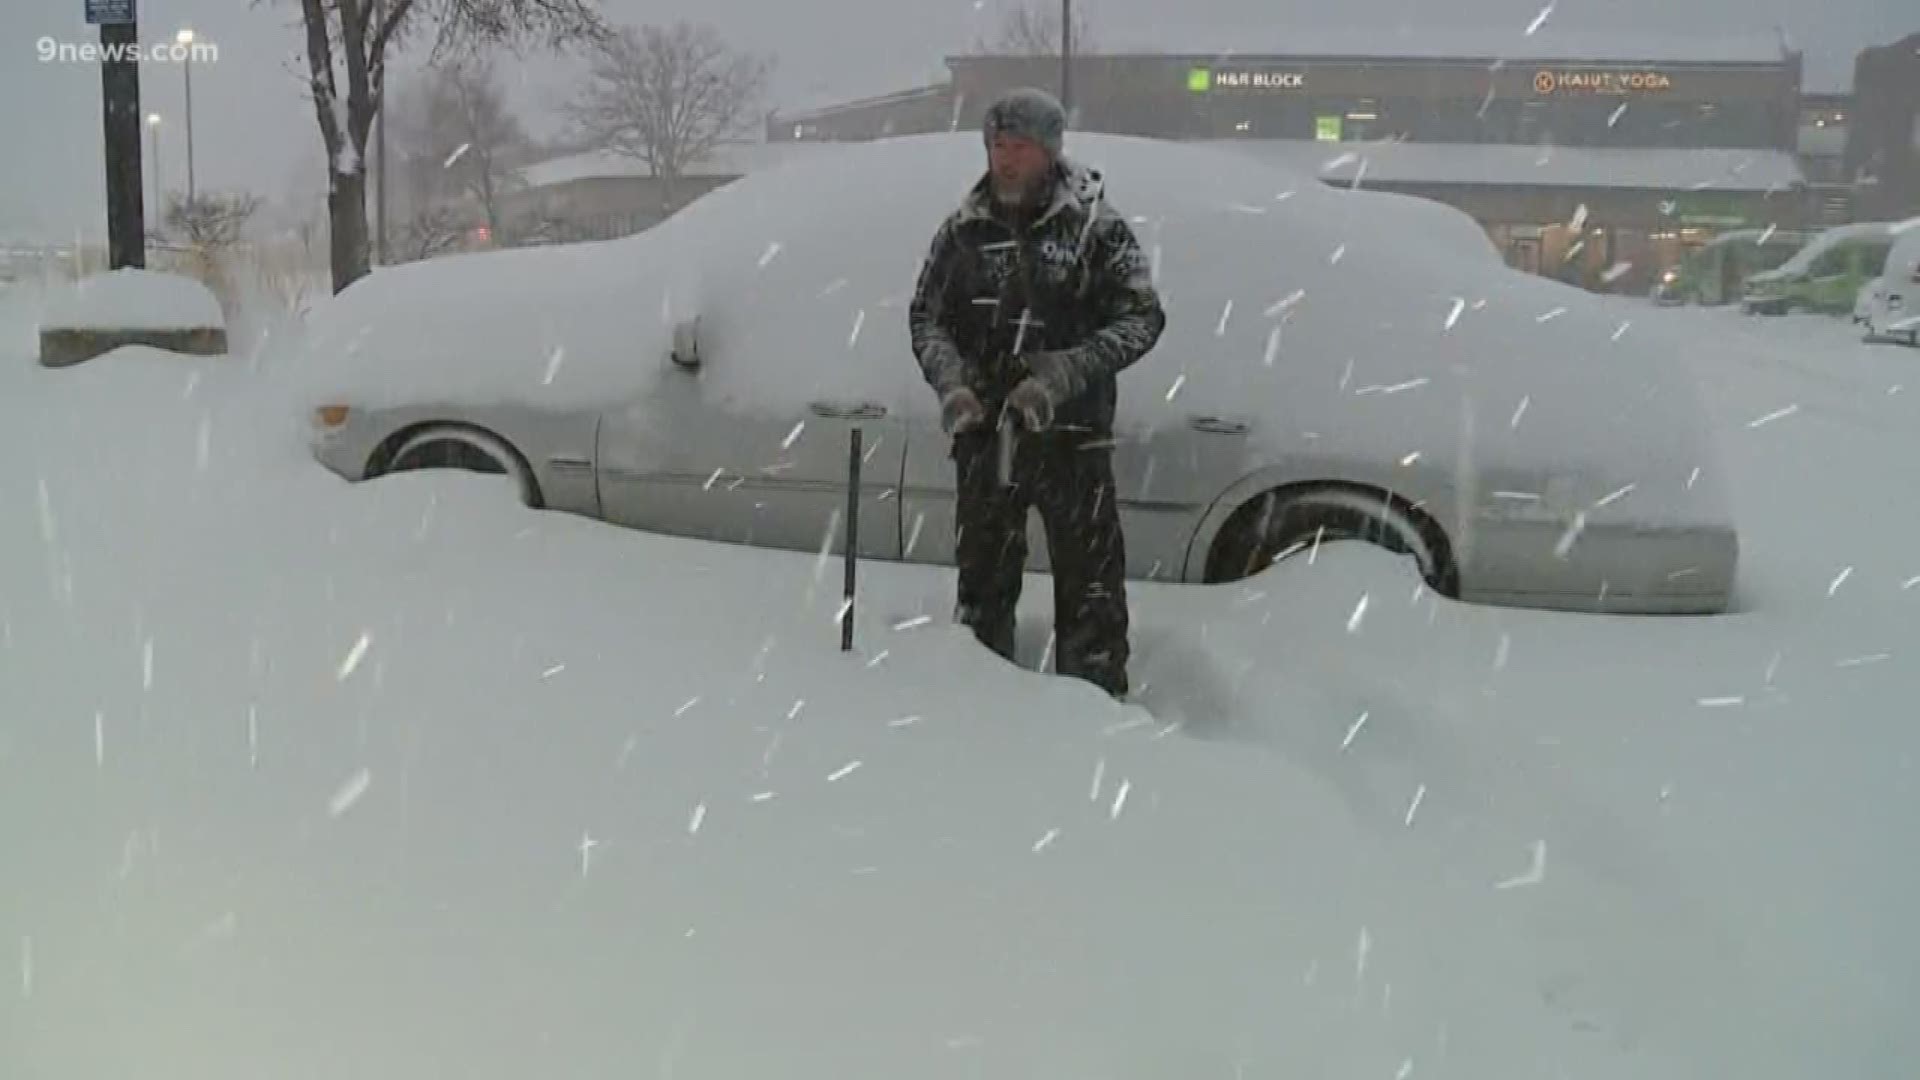 A November blizzard hit Boulder and 9NEWS Stormchaser Cory Reppenhagen was there (and pretty excited about it).